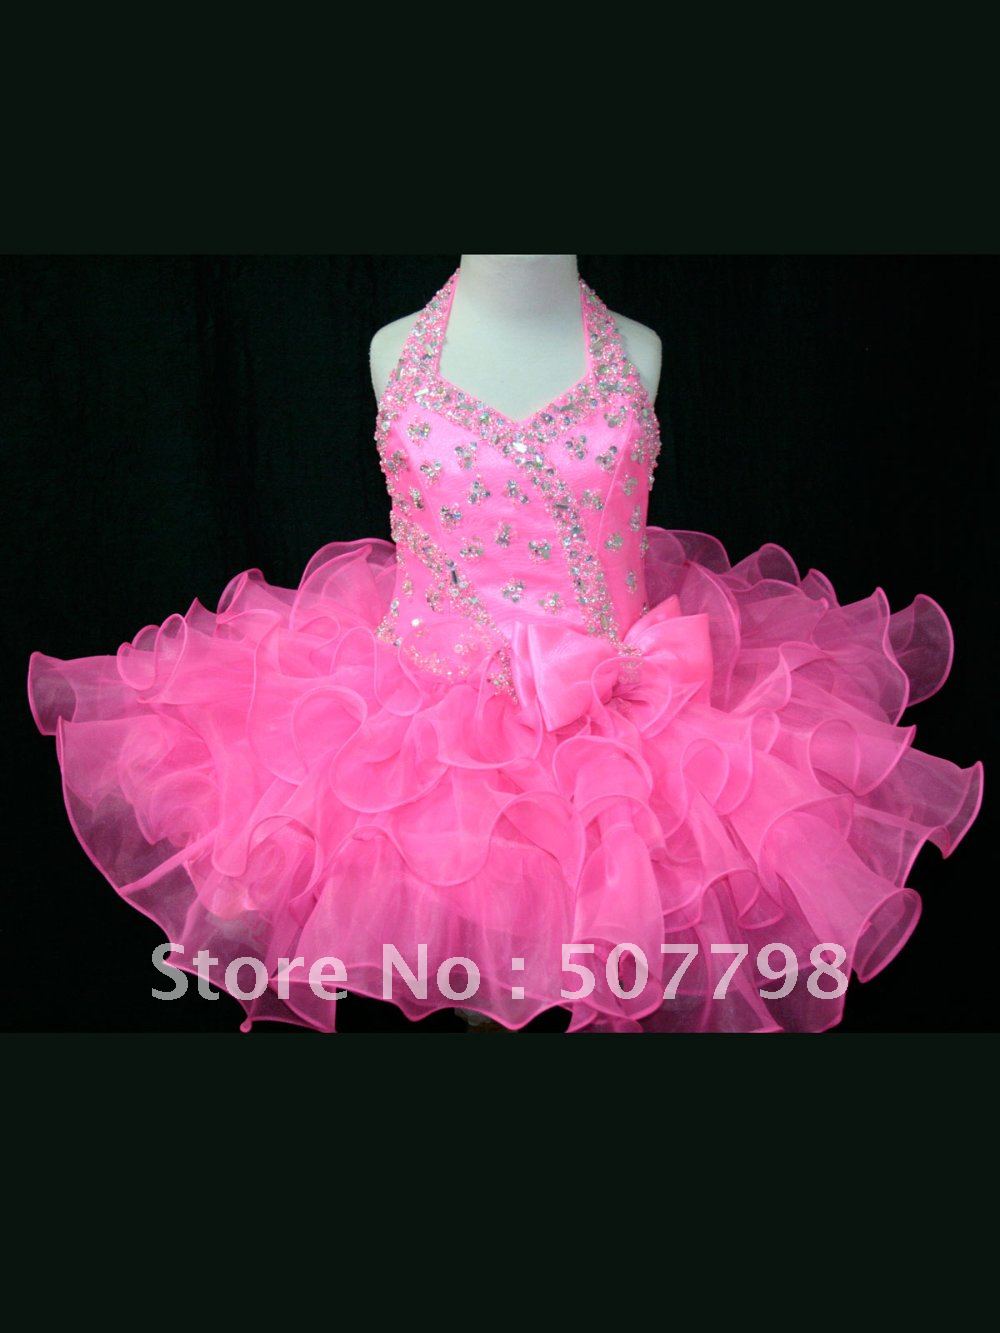 Dhl freeshipping HALTER PINK 2012fall style cupcake dress, above knee length girl formal pageant dress,2-7year old